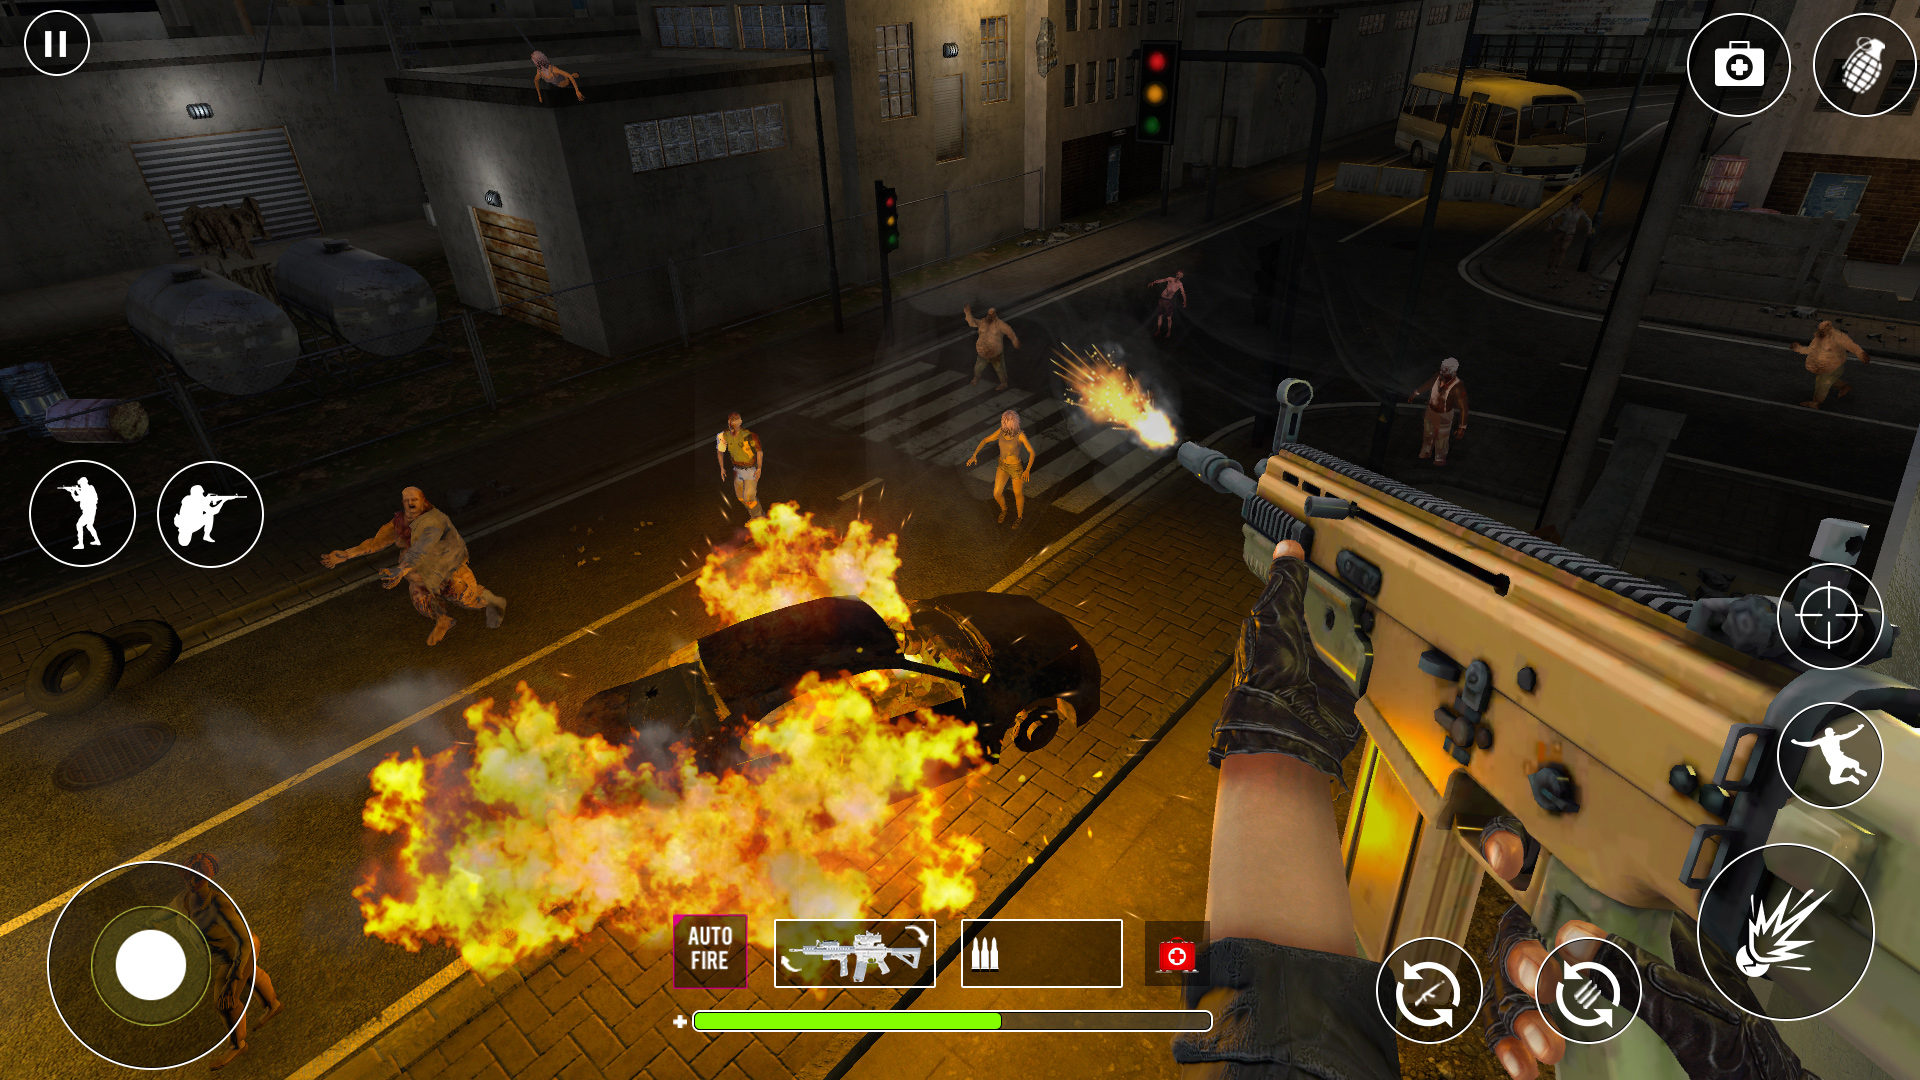 Download Zombie Shooting Games offline on PC with MEmu